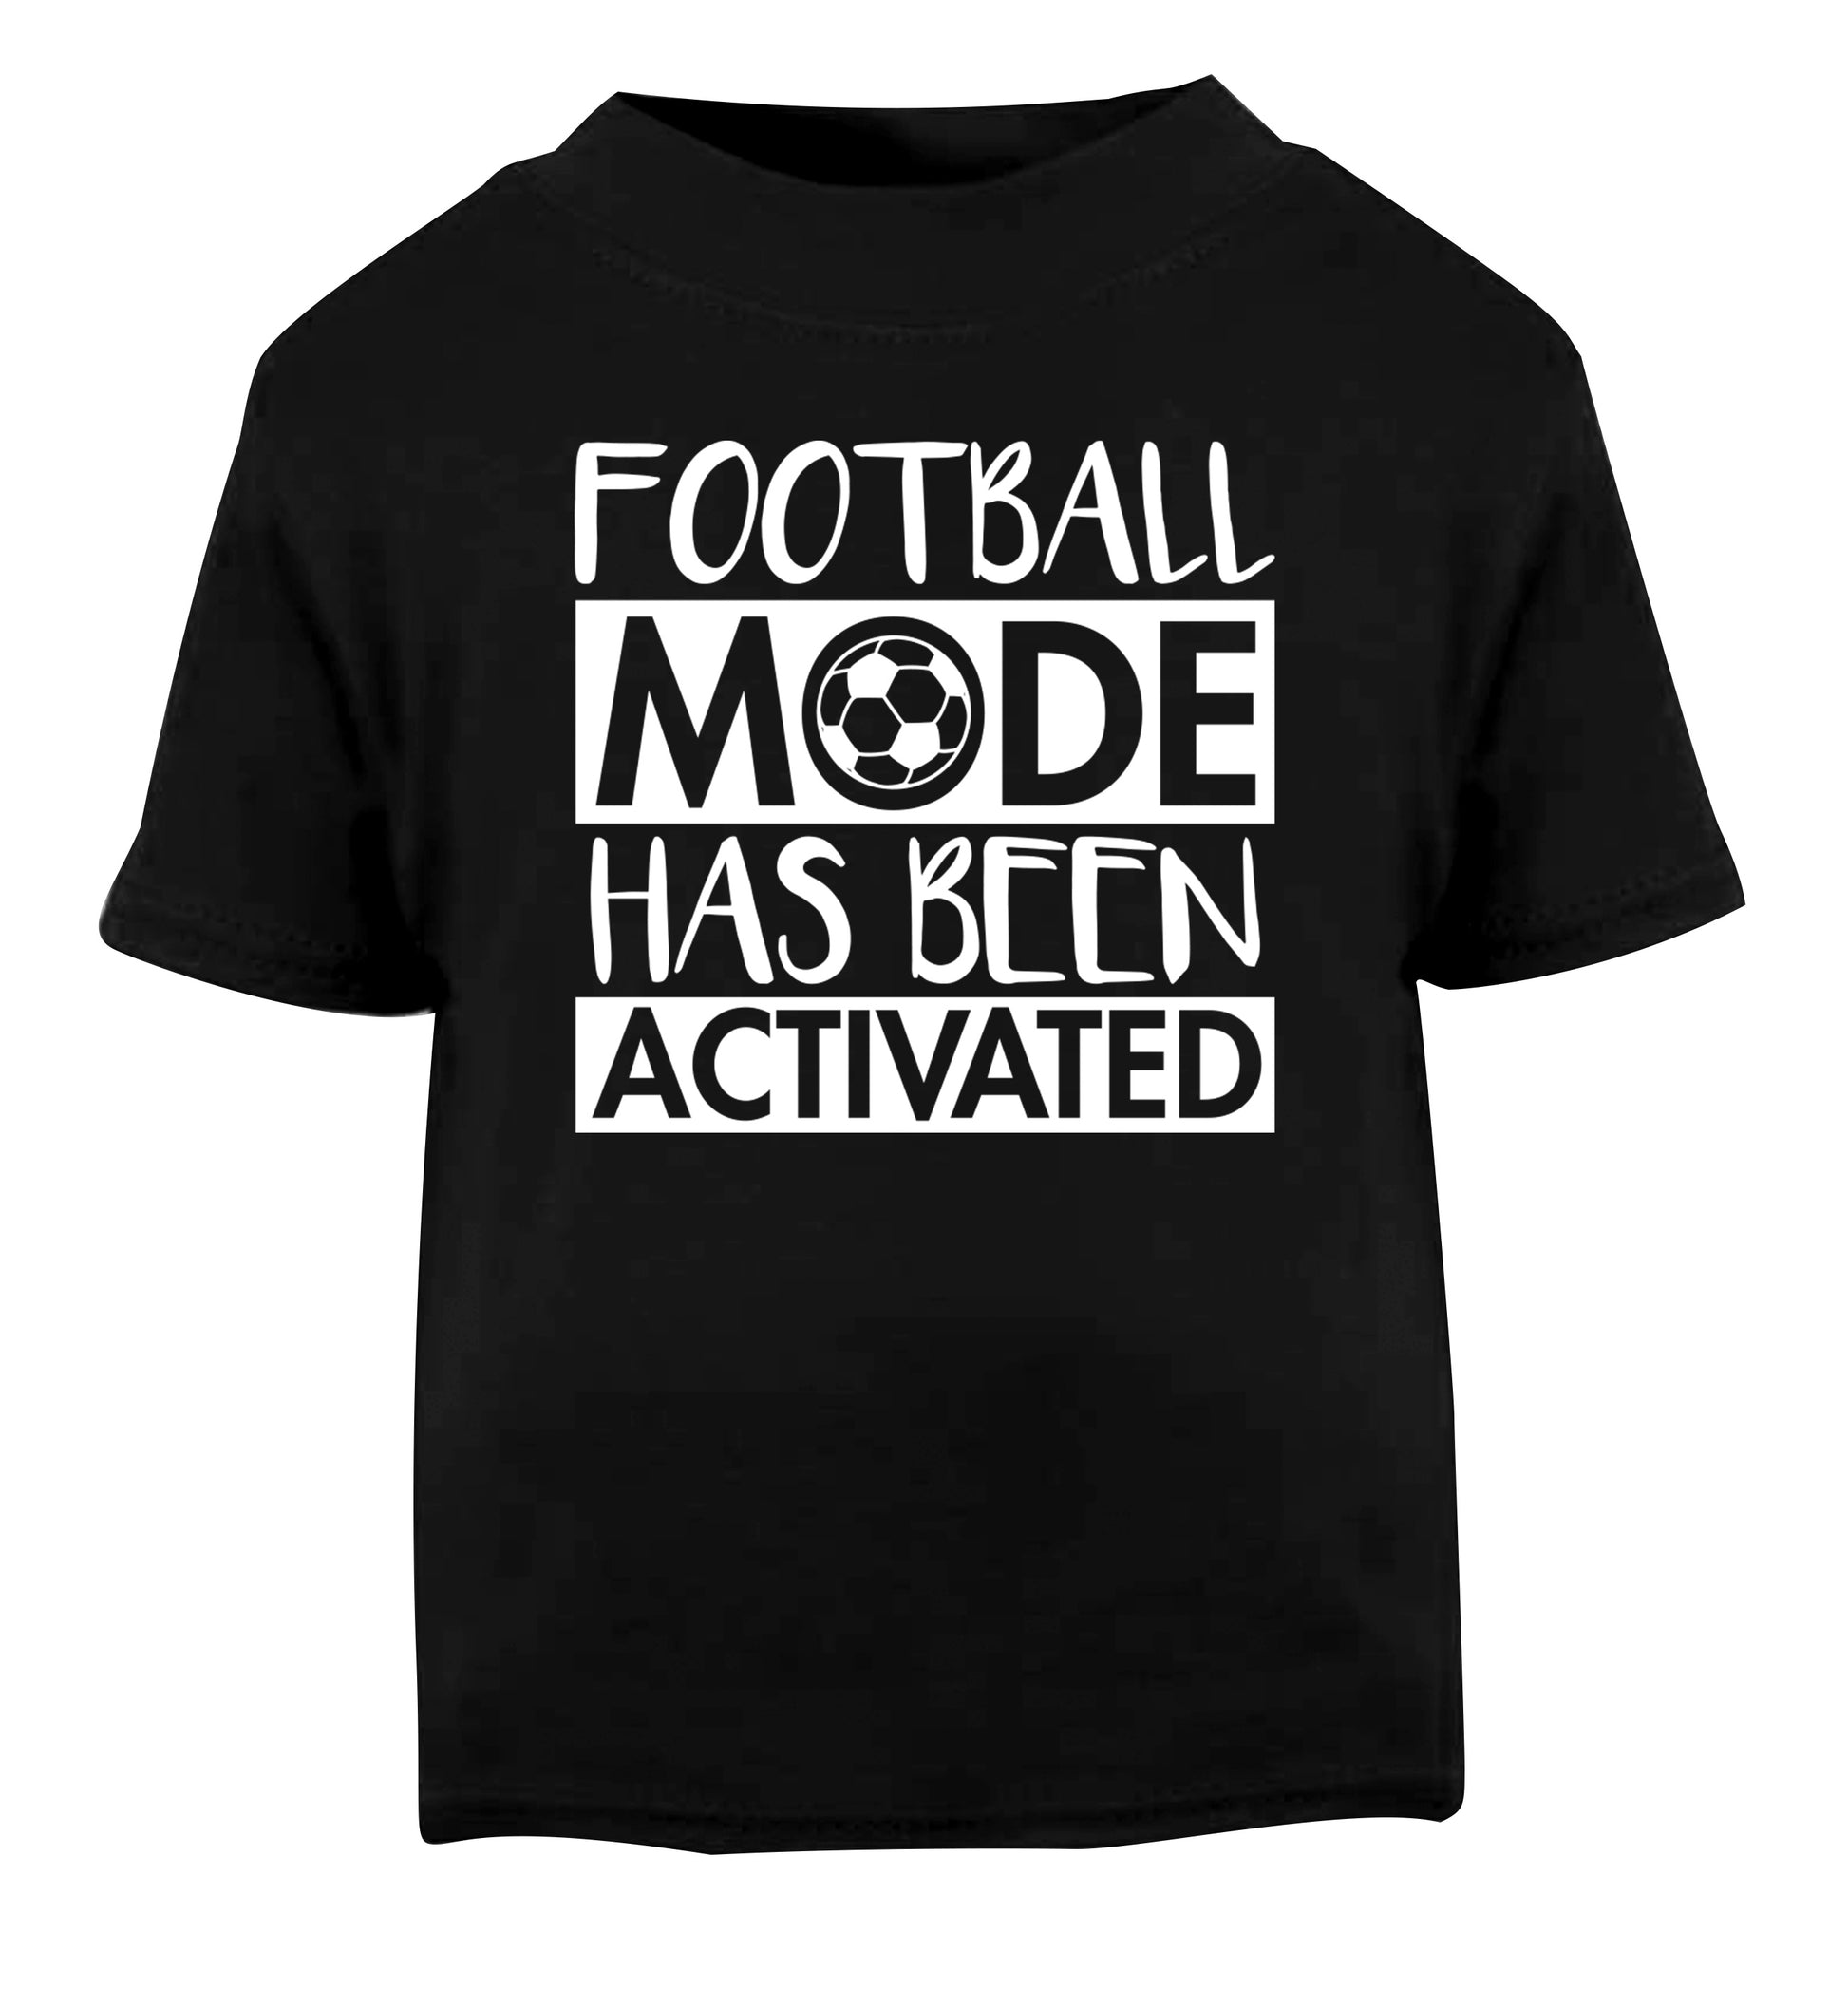 Football mode has been activated Black Baby Toddler Tshirt 2 years